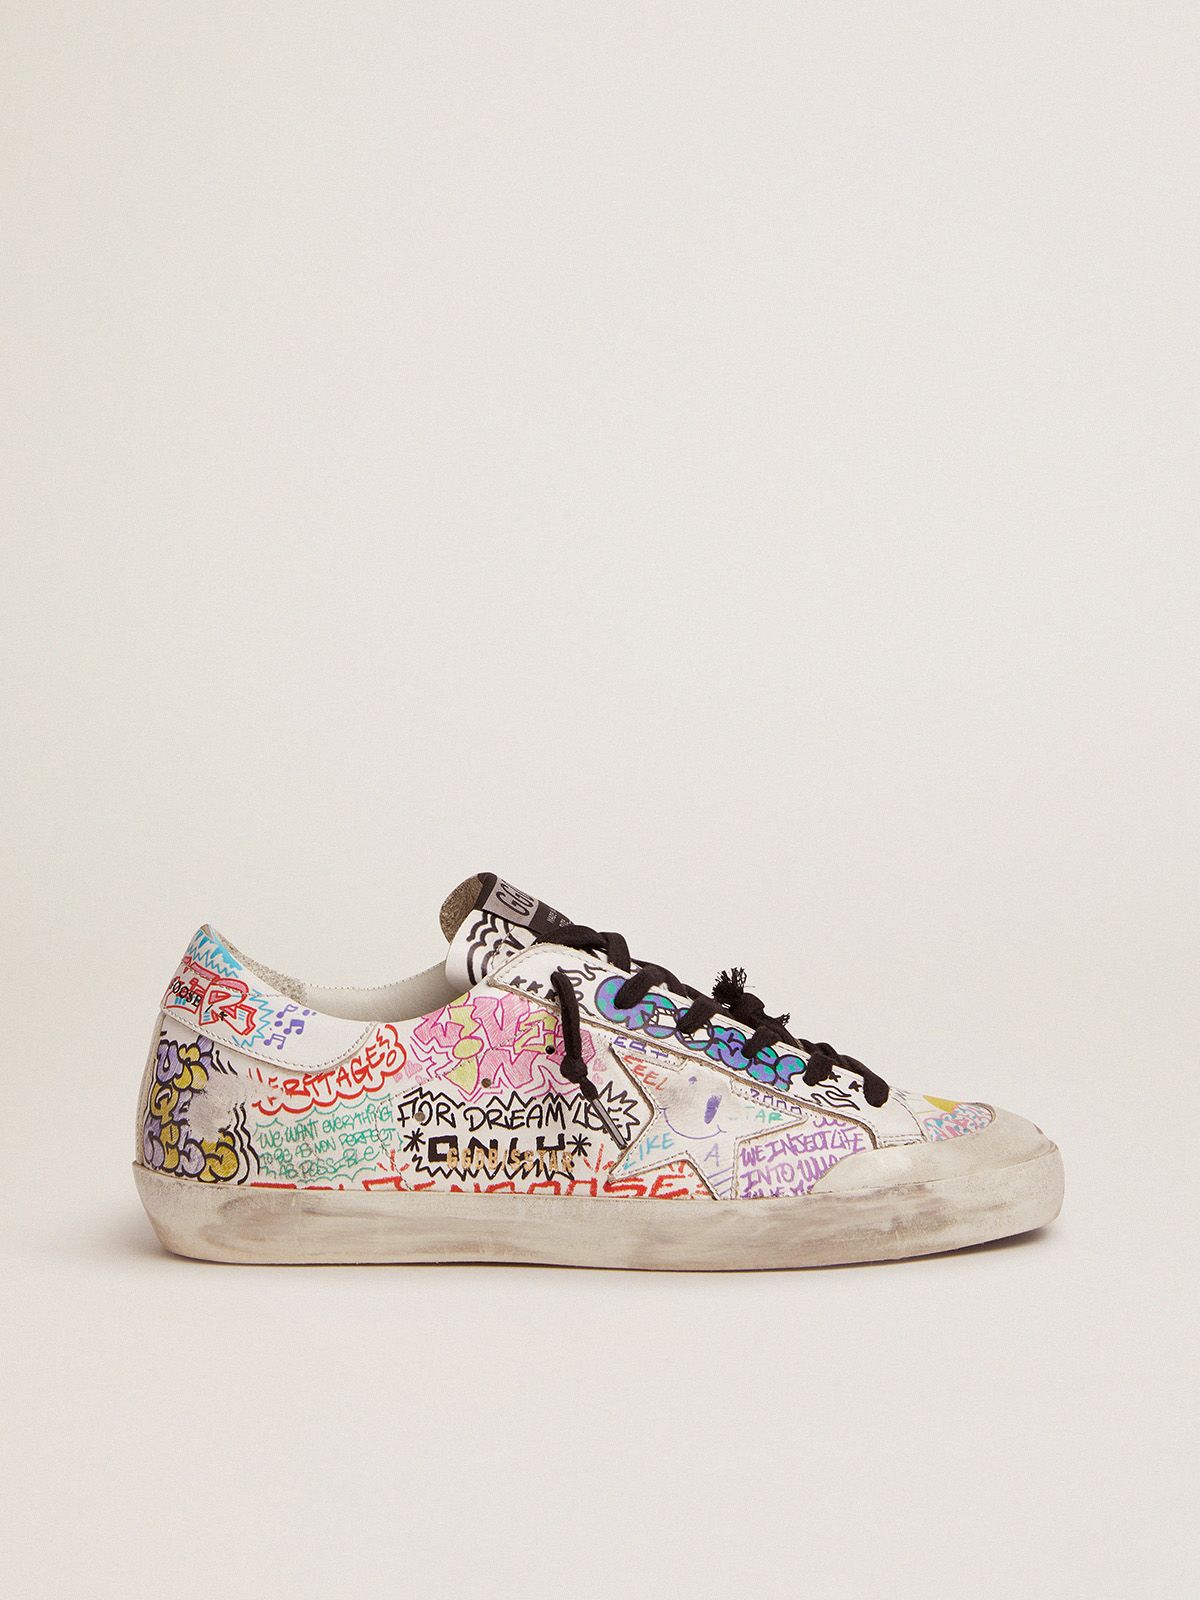 golden goose in print graffiti with Super-Star leather white sneakers multicolored